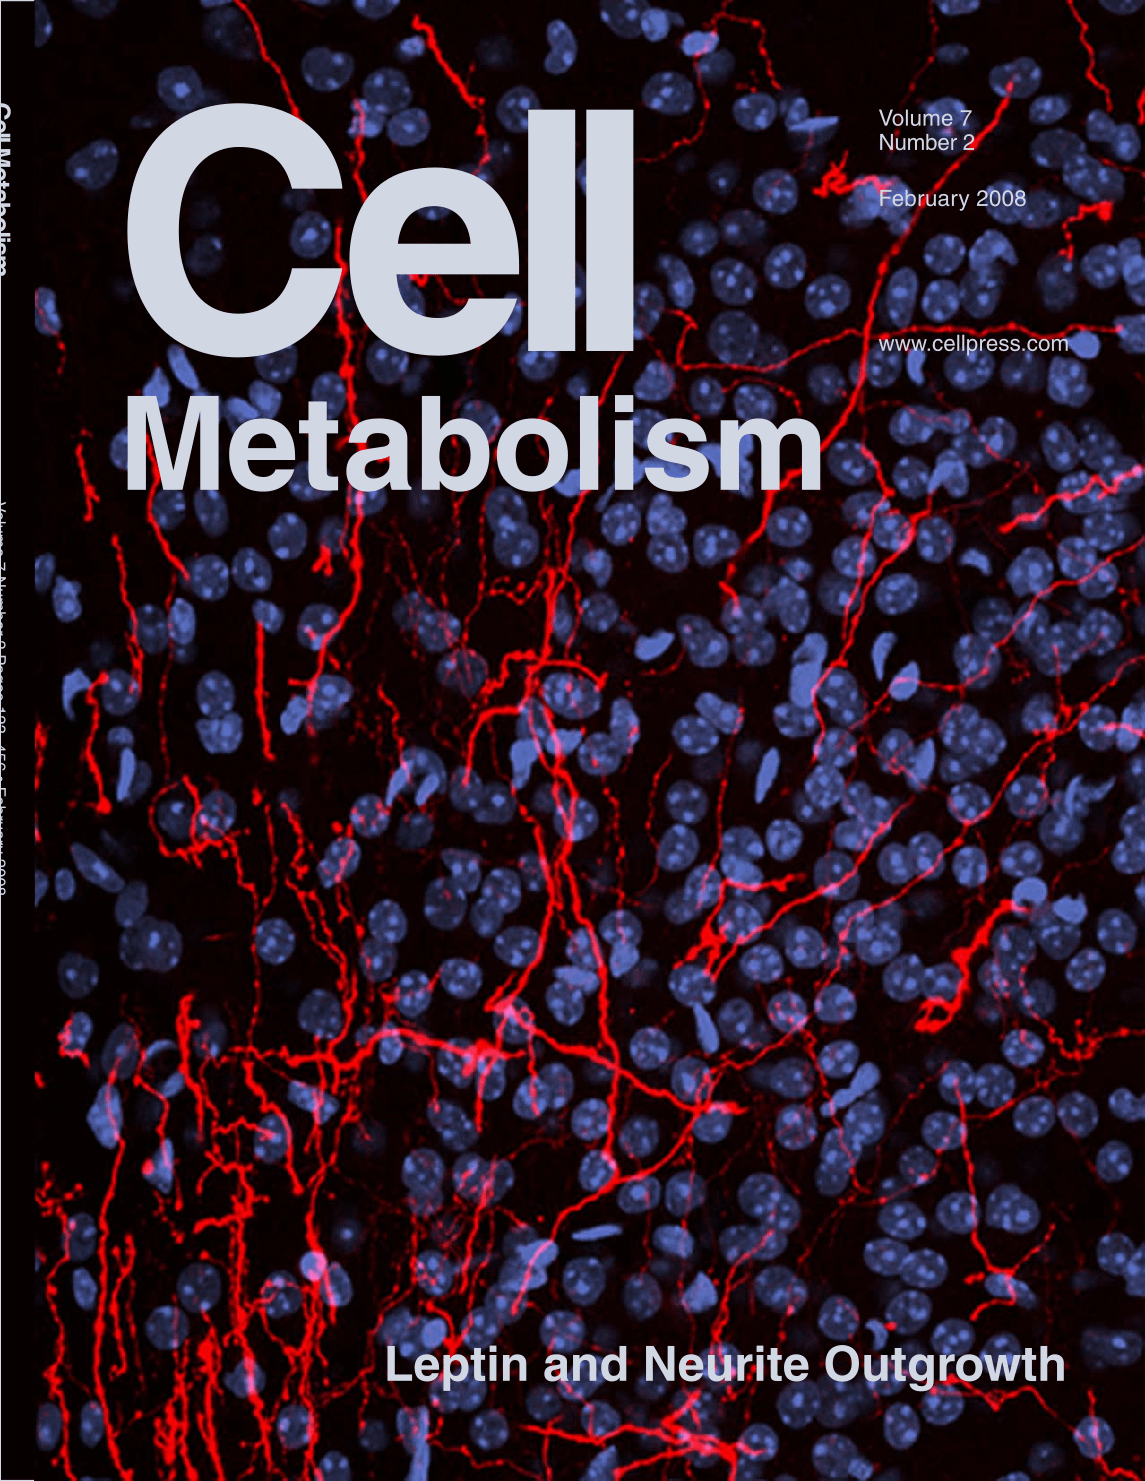 Cell metabolism leptin and neurite